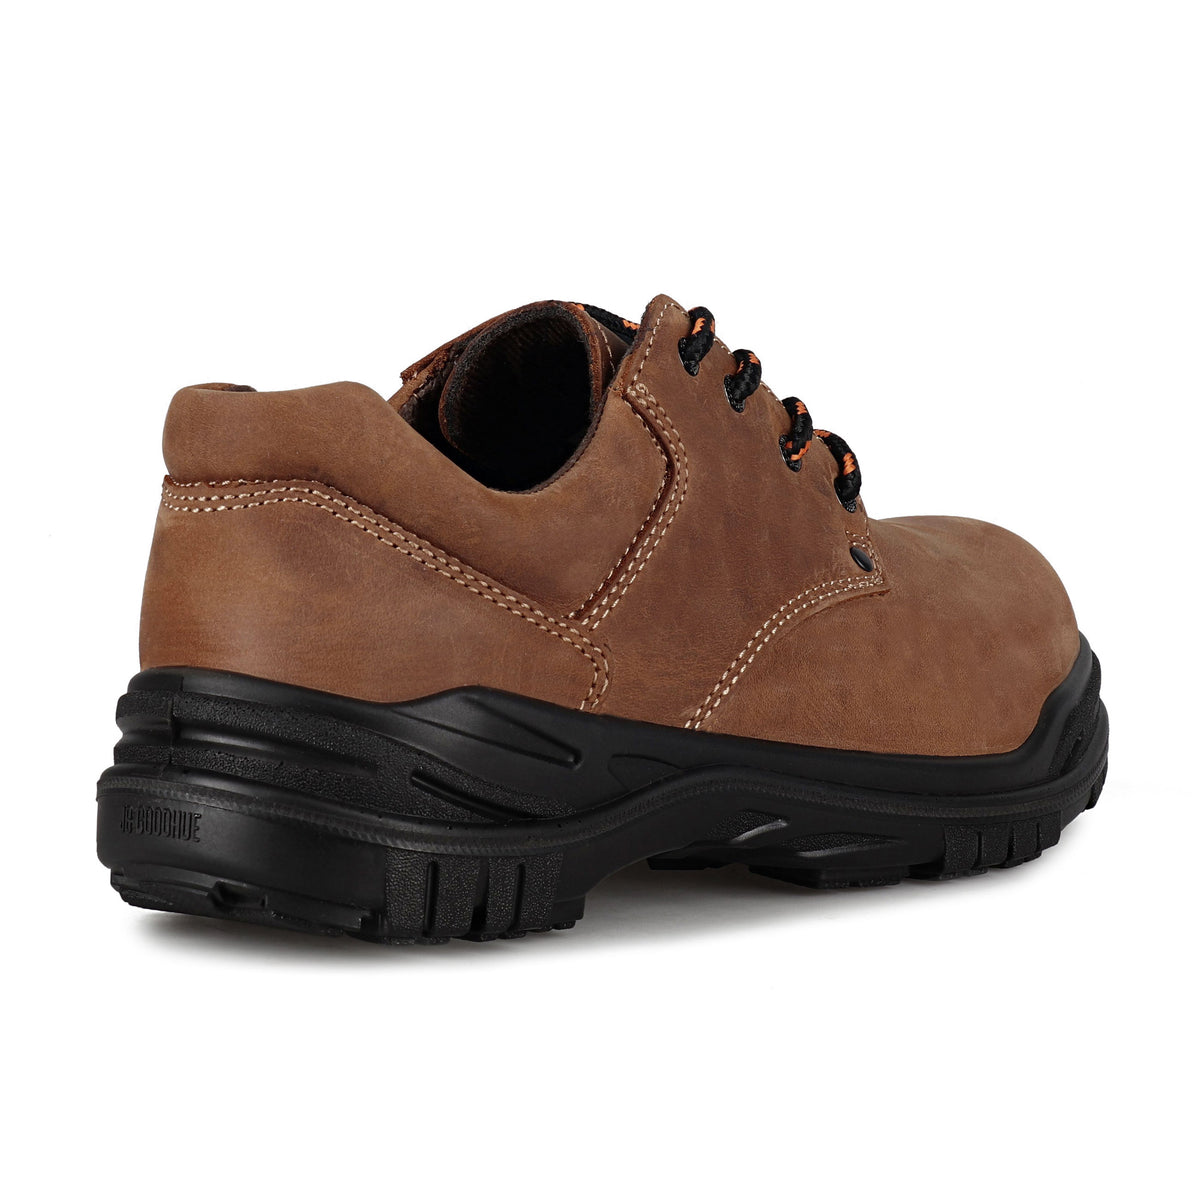 Jb Goodhue Warrior 20101 Brown Shoes